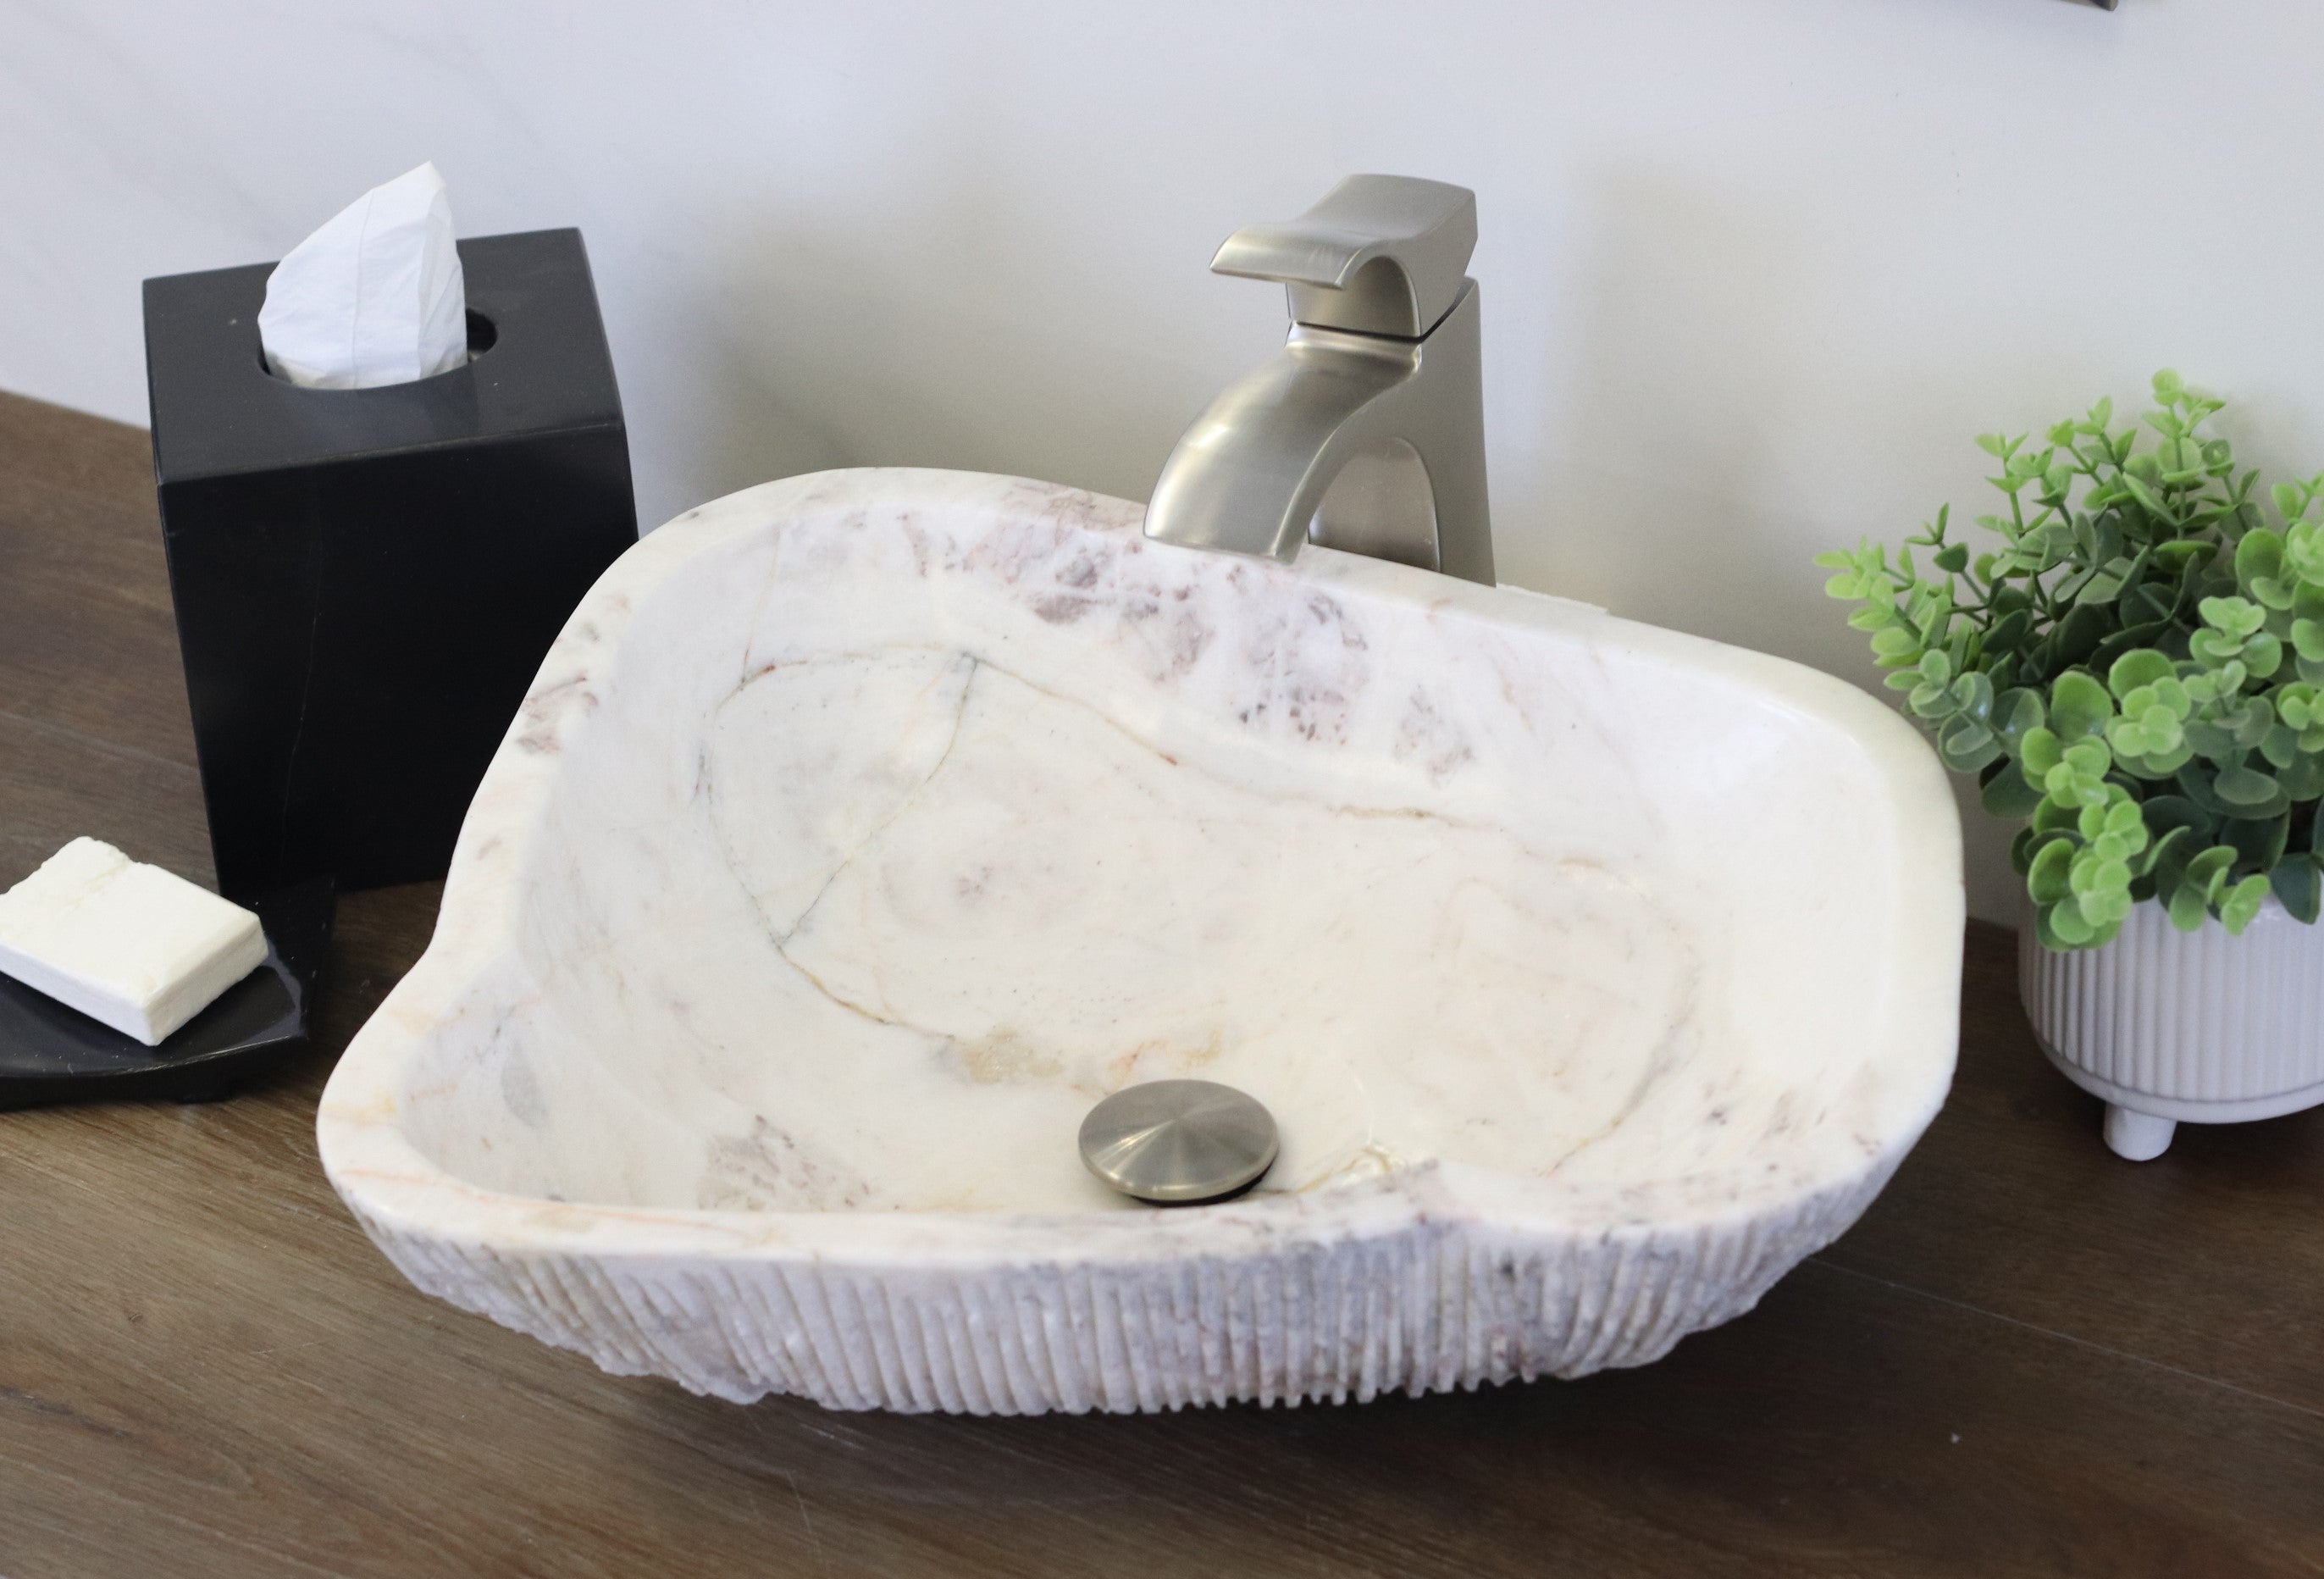 White Onyx Vessel Sink. A beautiful work of art. We offer fast shipping. Handmade in Mexico. We hand finish, package, and ship from the USA. Buy now at www.felipeandgrace.com. 